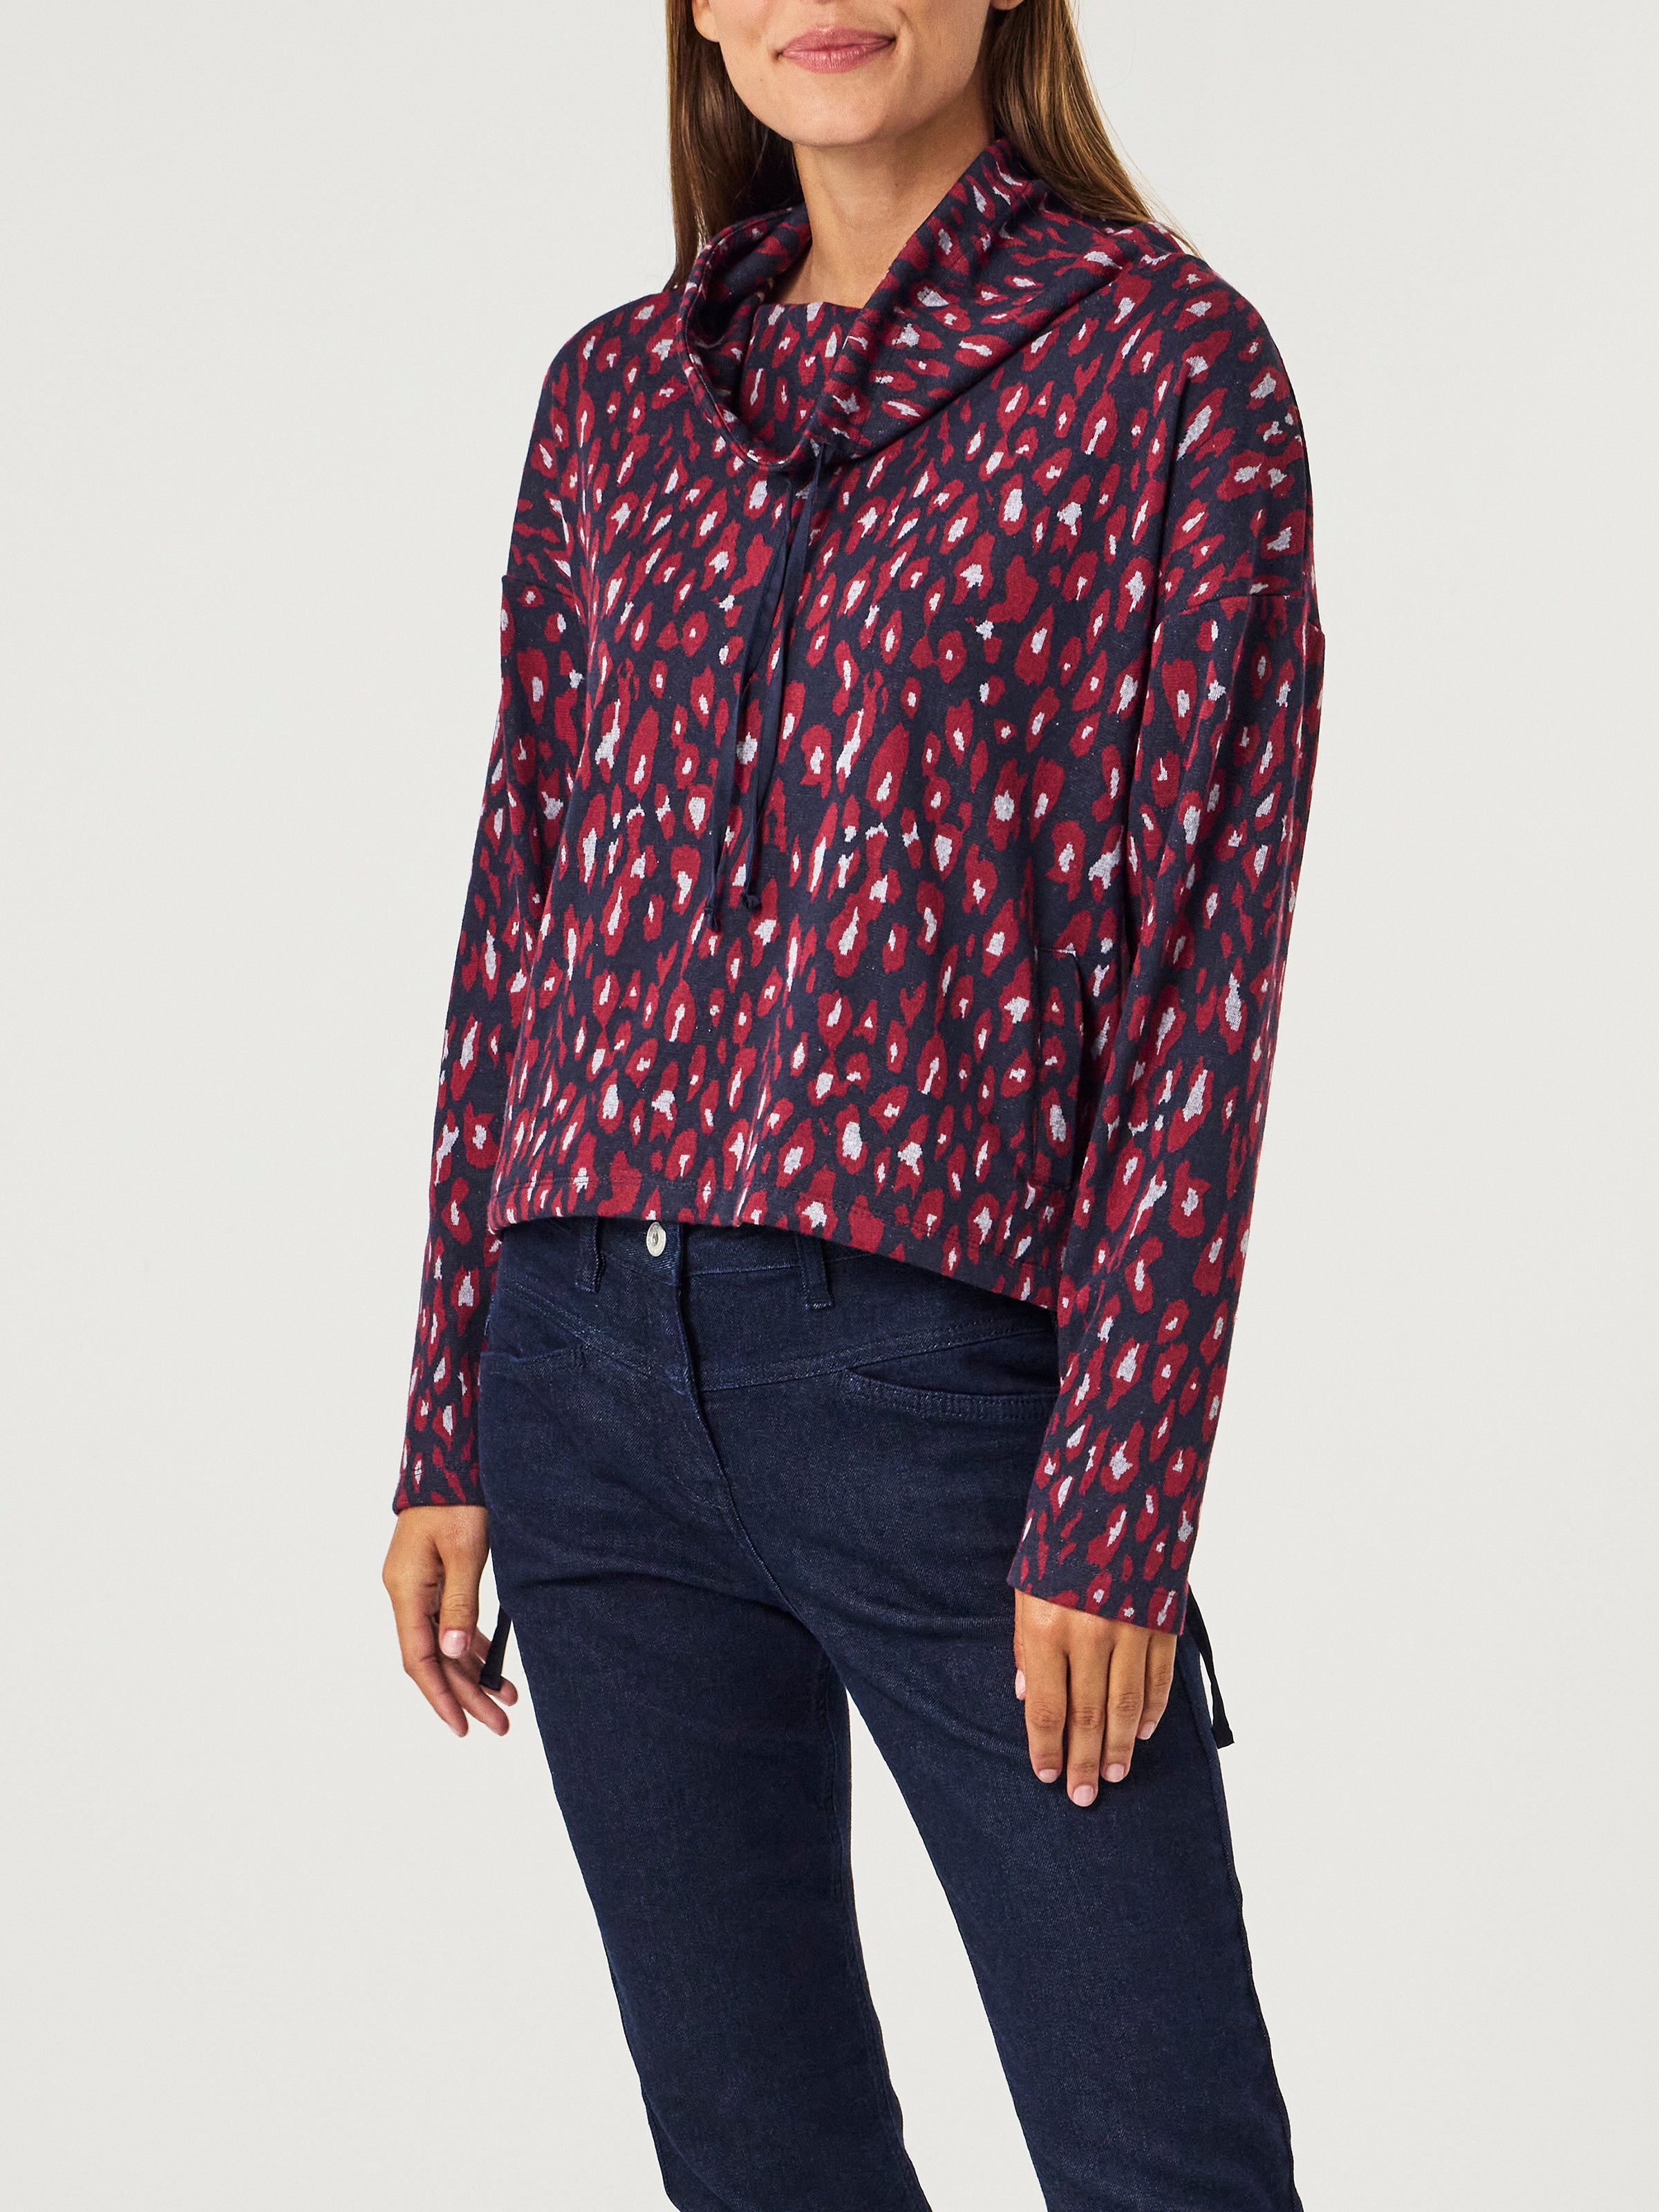 Long-sleeve top with shawl collar